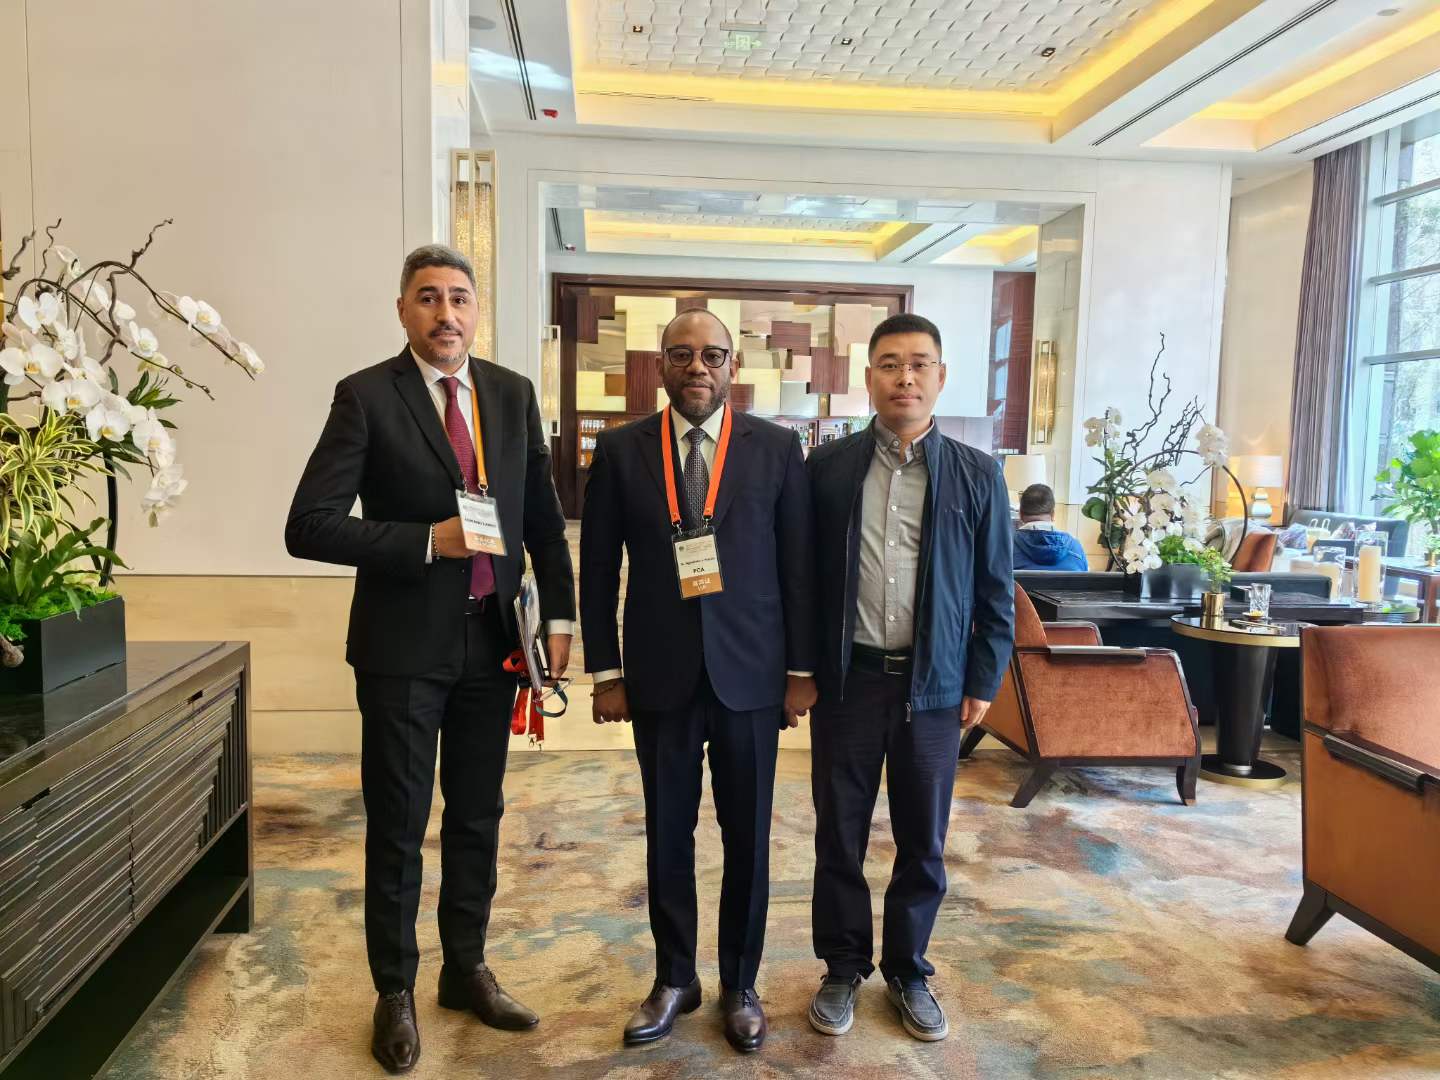 Welcome Shiputec’s old friend to visit the China Forum